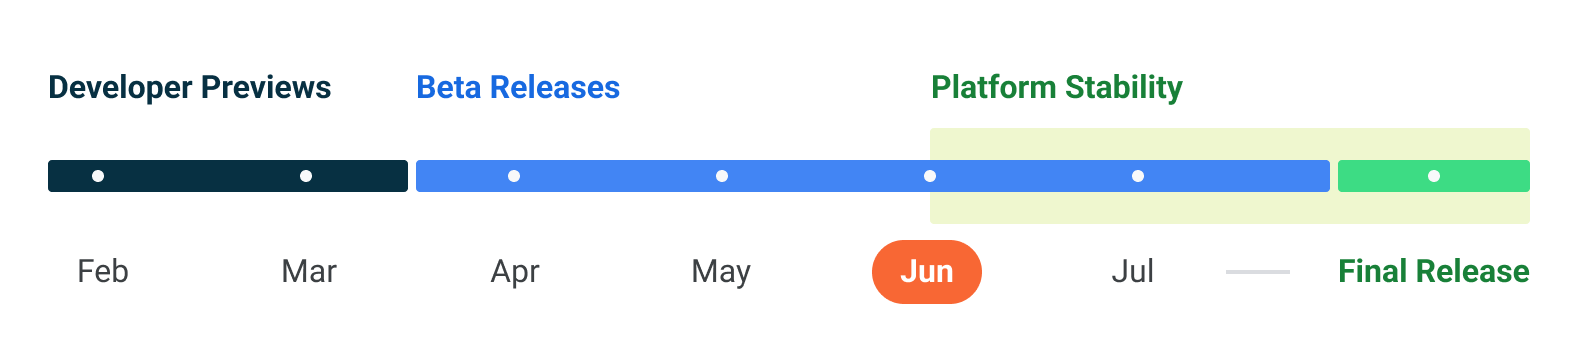 A graphic showing the anticipated release timeline for Android 13 with the final release being sometime after July 2022.